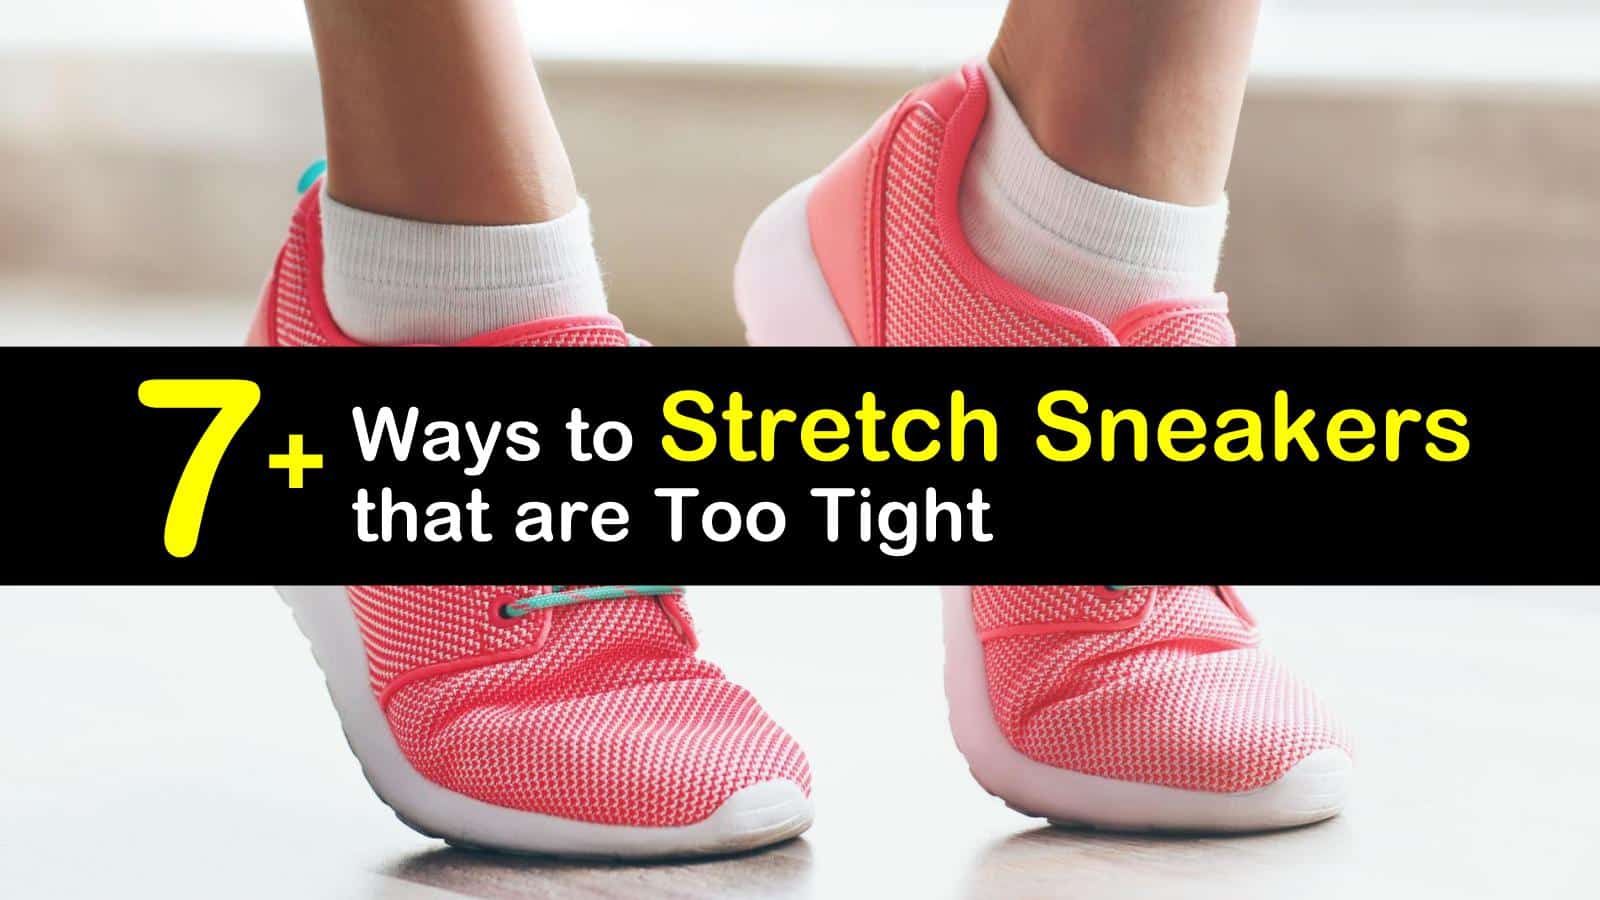 Ways to Stretch Sneakers that are Too Tight